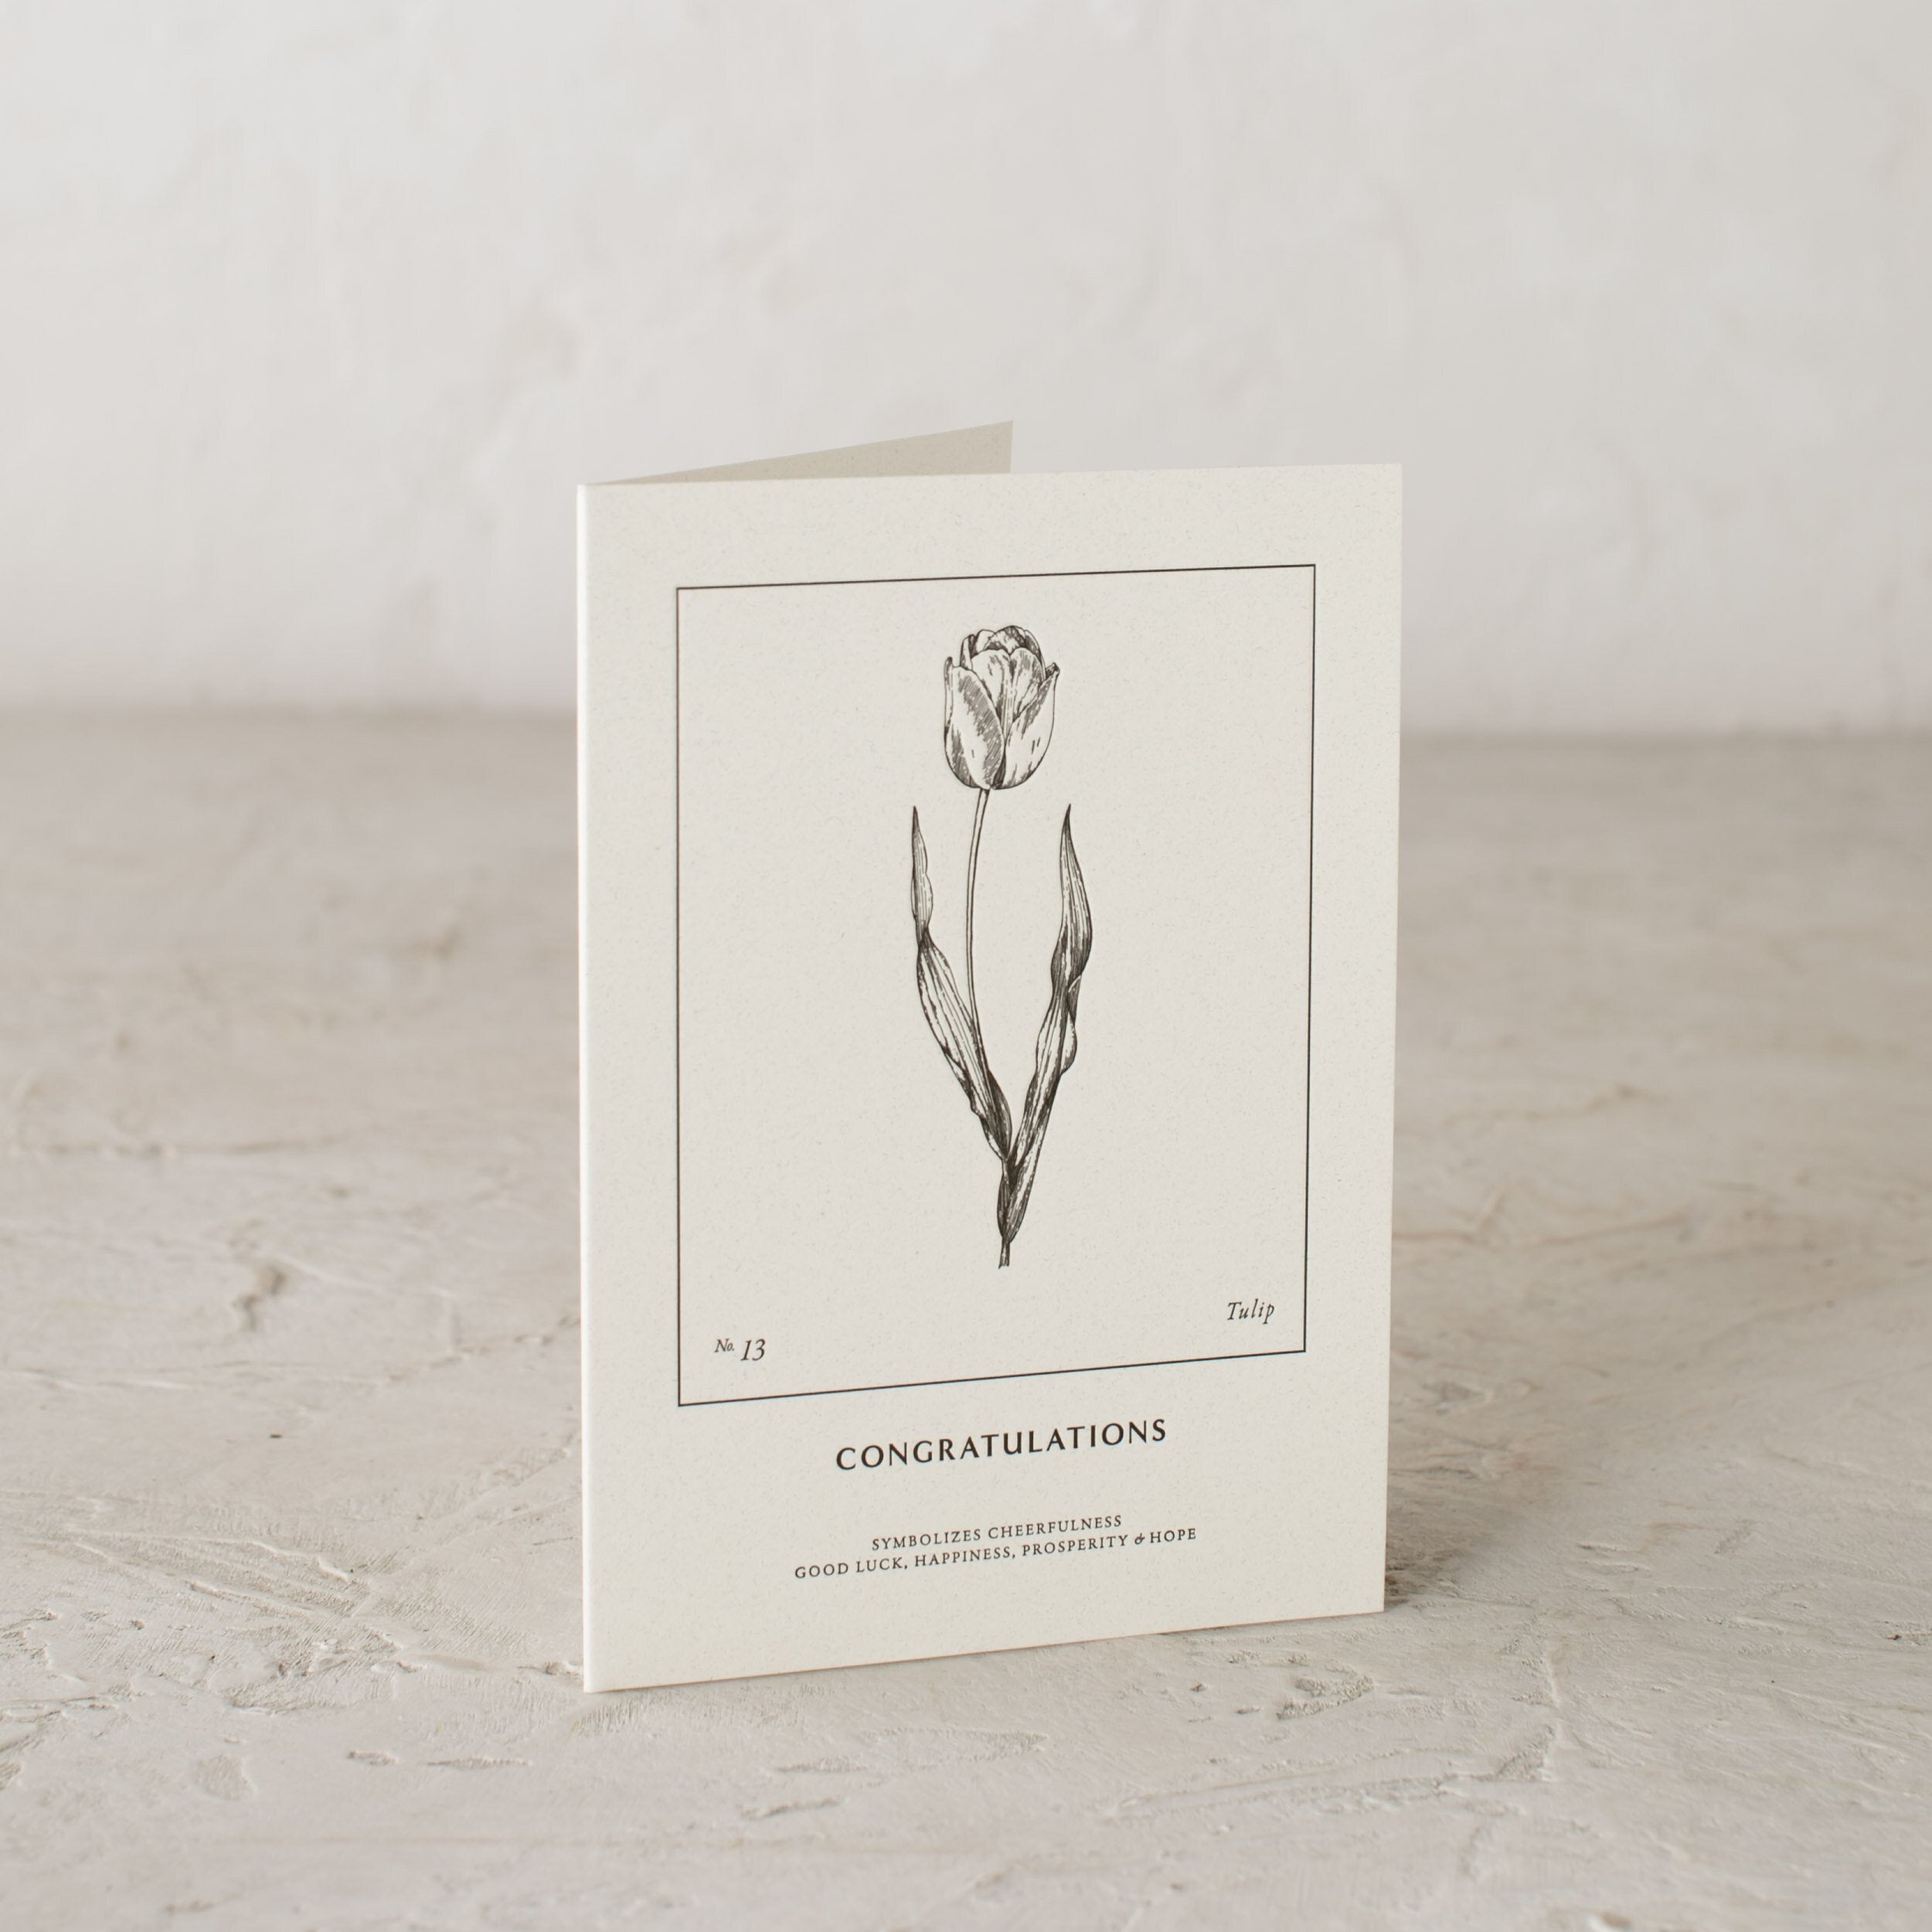 Embossed botanical greeting card. Tulip illustration, under reads "Congratulations" Symbolizes cheerfulness good luck happiness, prosperity and hope. Designed and sold by Shop Verdant Kansas City gift card.